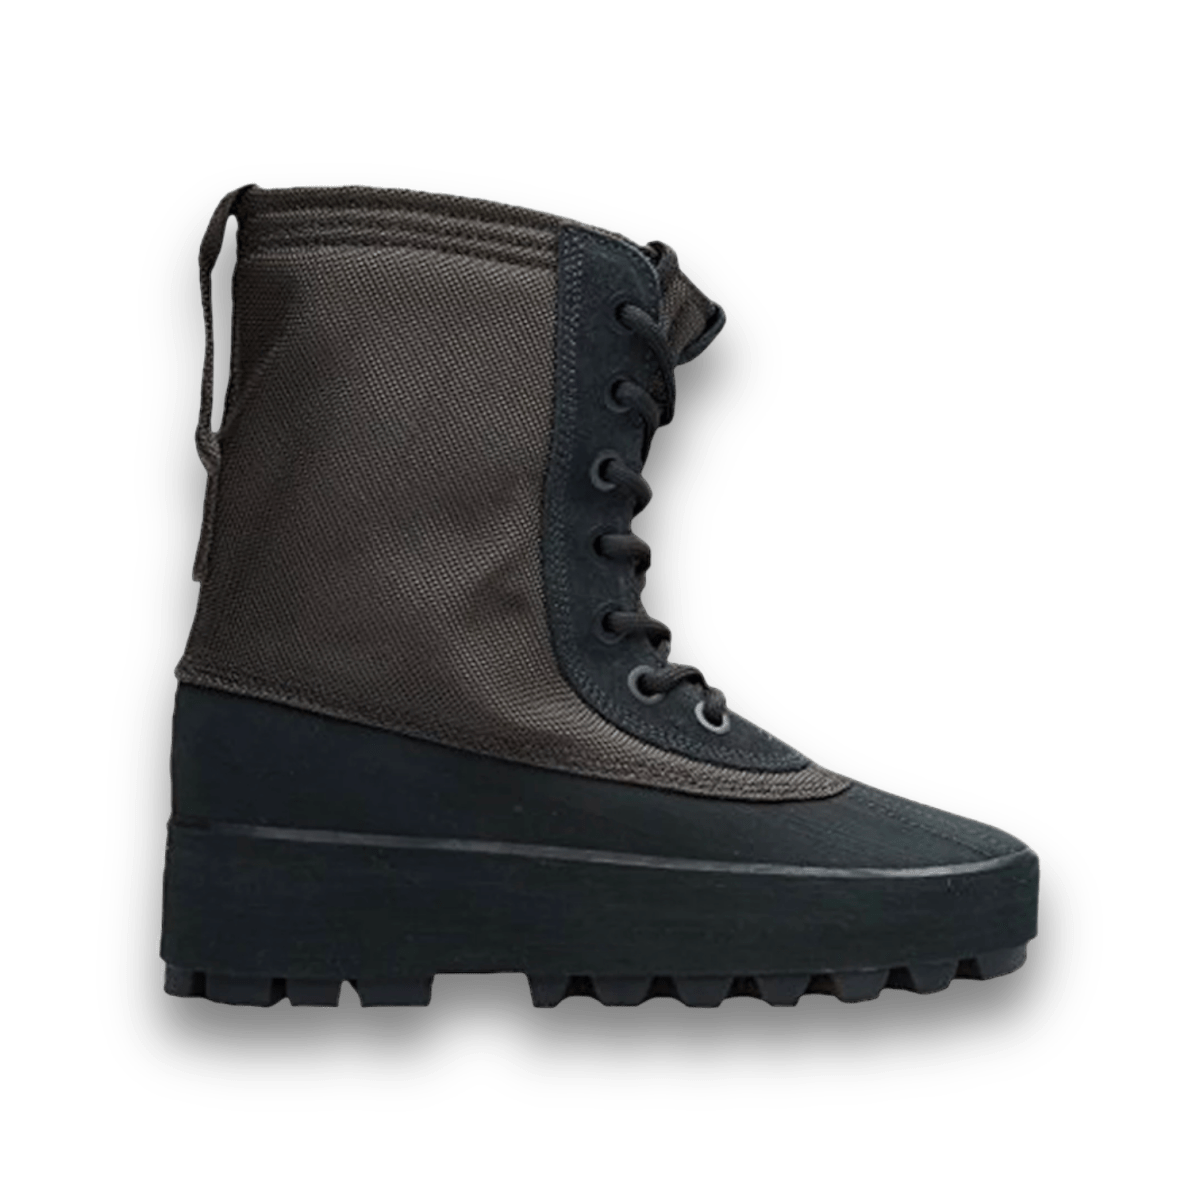 Yeezy 950 Boot 'Pirate' 2023 - High Sneaker - Yeezy - Jawns on Fire - sneakers